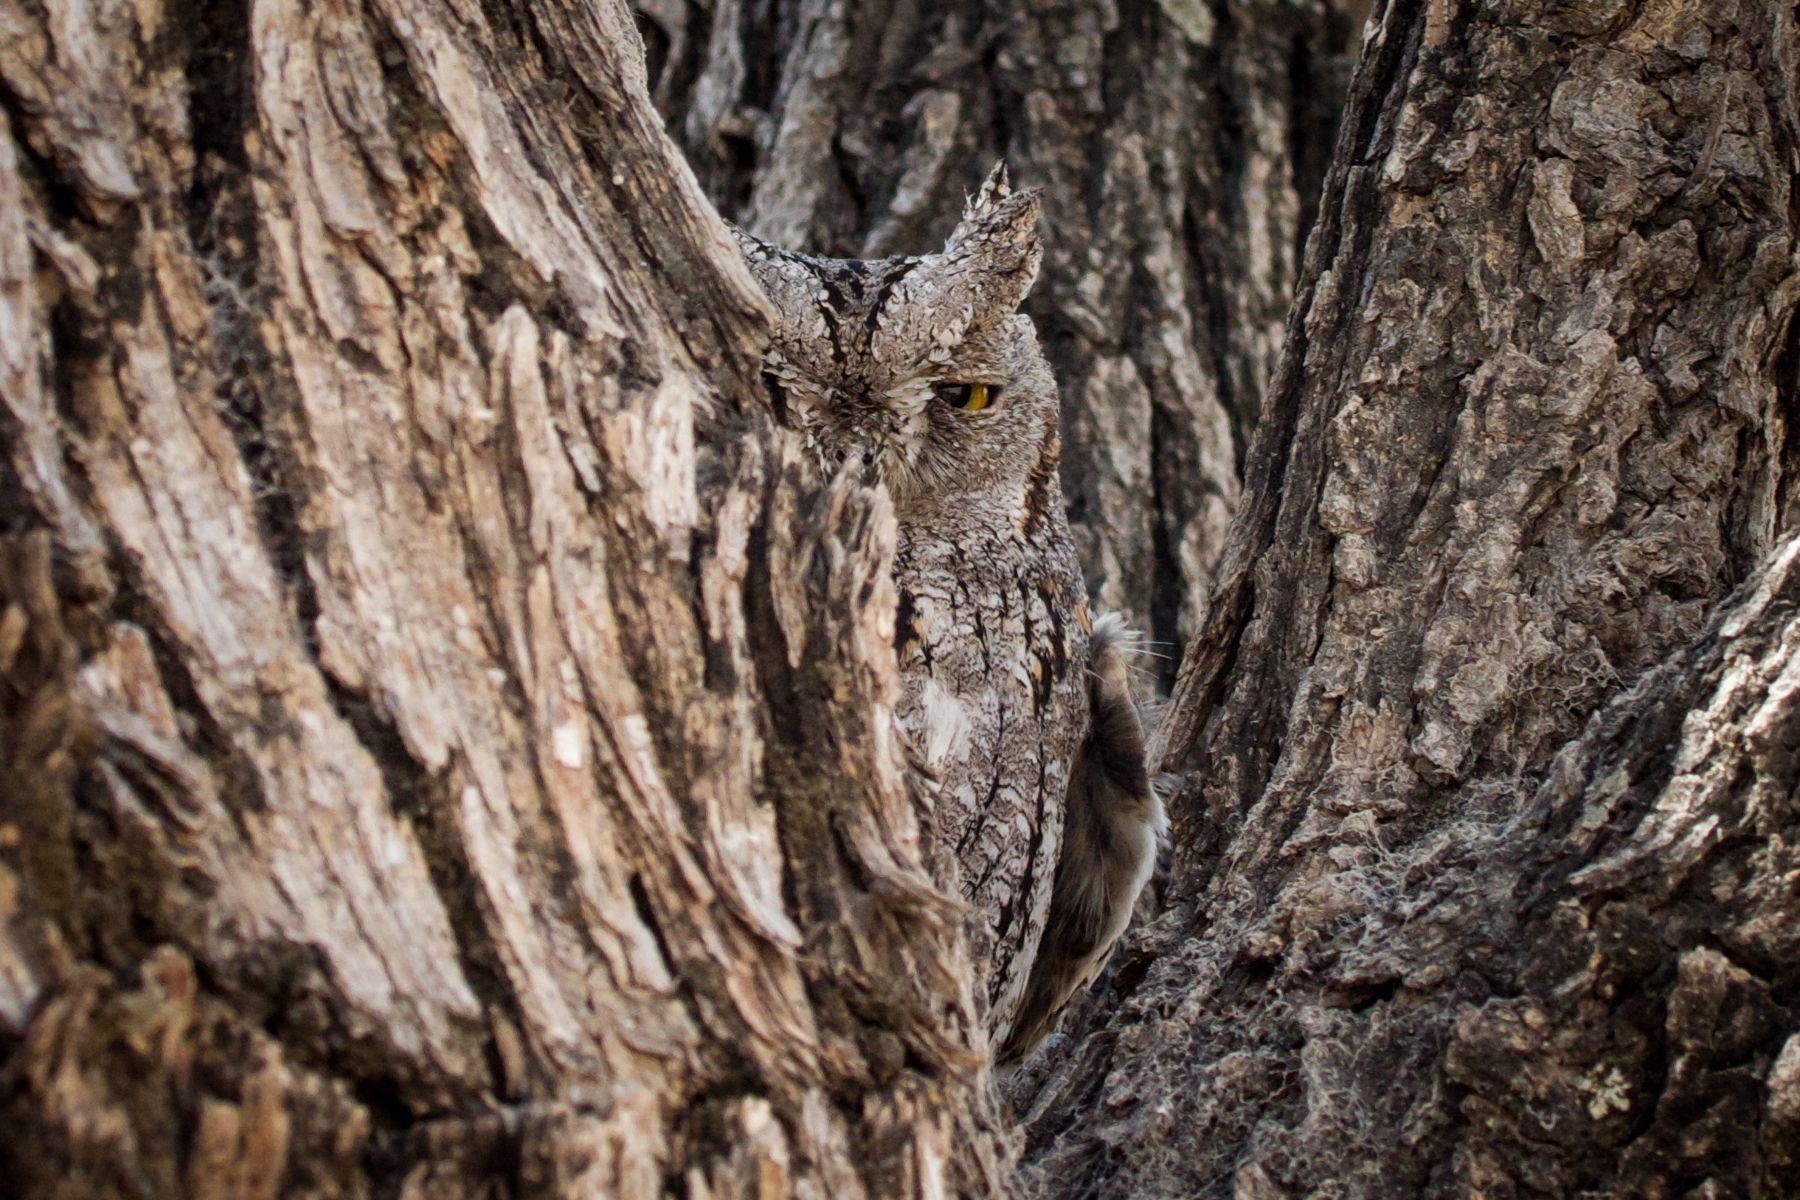 An African Scops Owl peeps in a mopane tree during our wildlife photography tour of Namibia